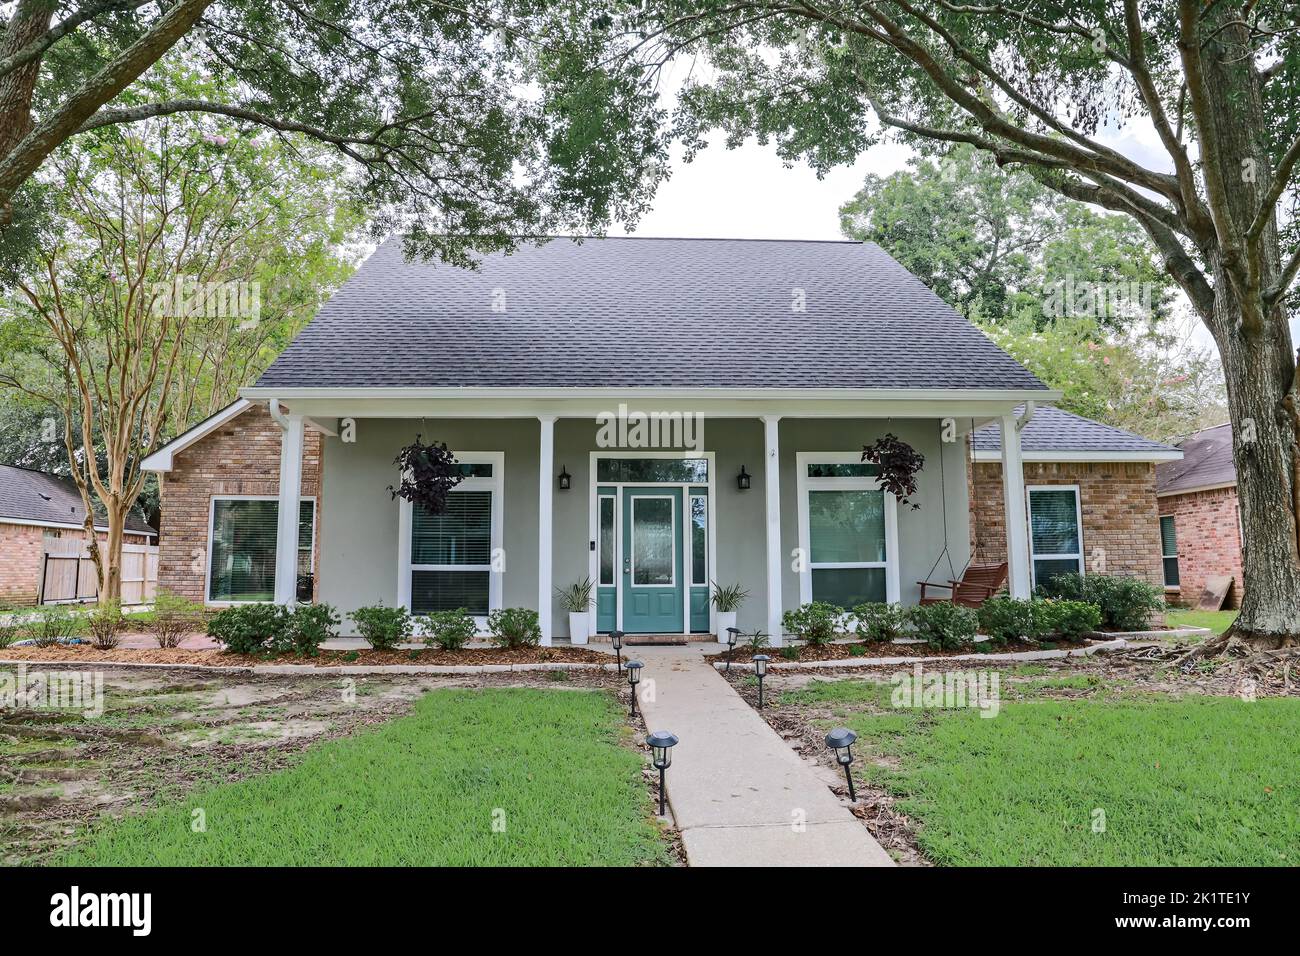 A front view of an Acadian renovated home with columns, sidewalks and a colorful front door recently purchased with the changing real estate market. Stock Photo